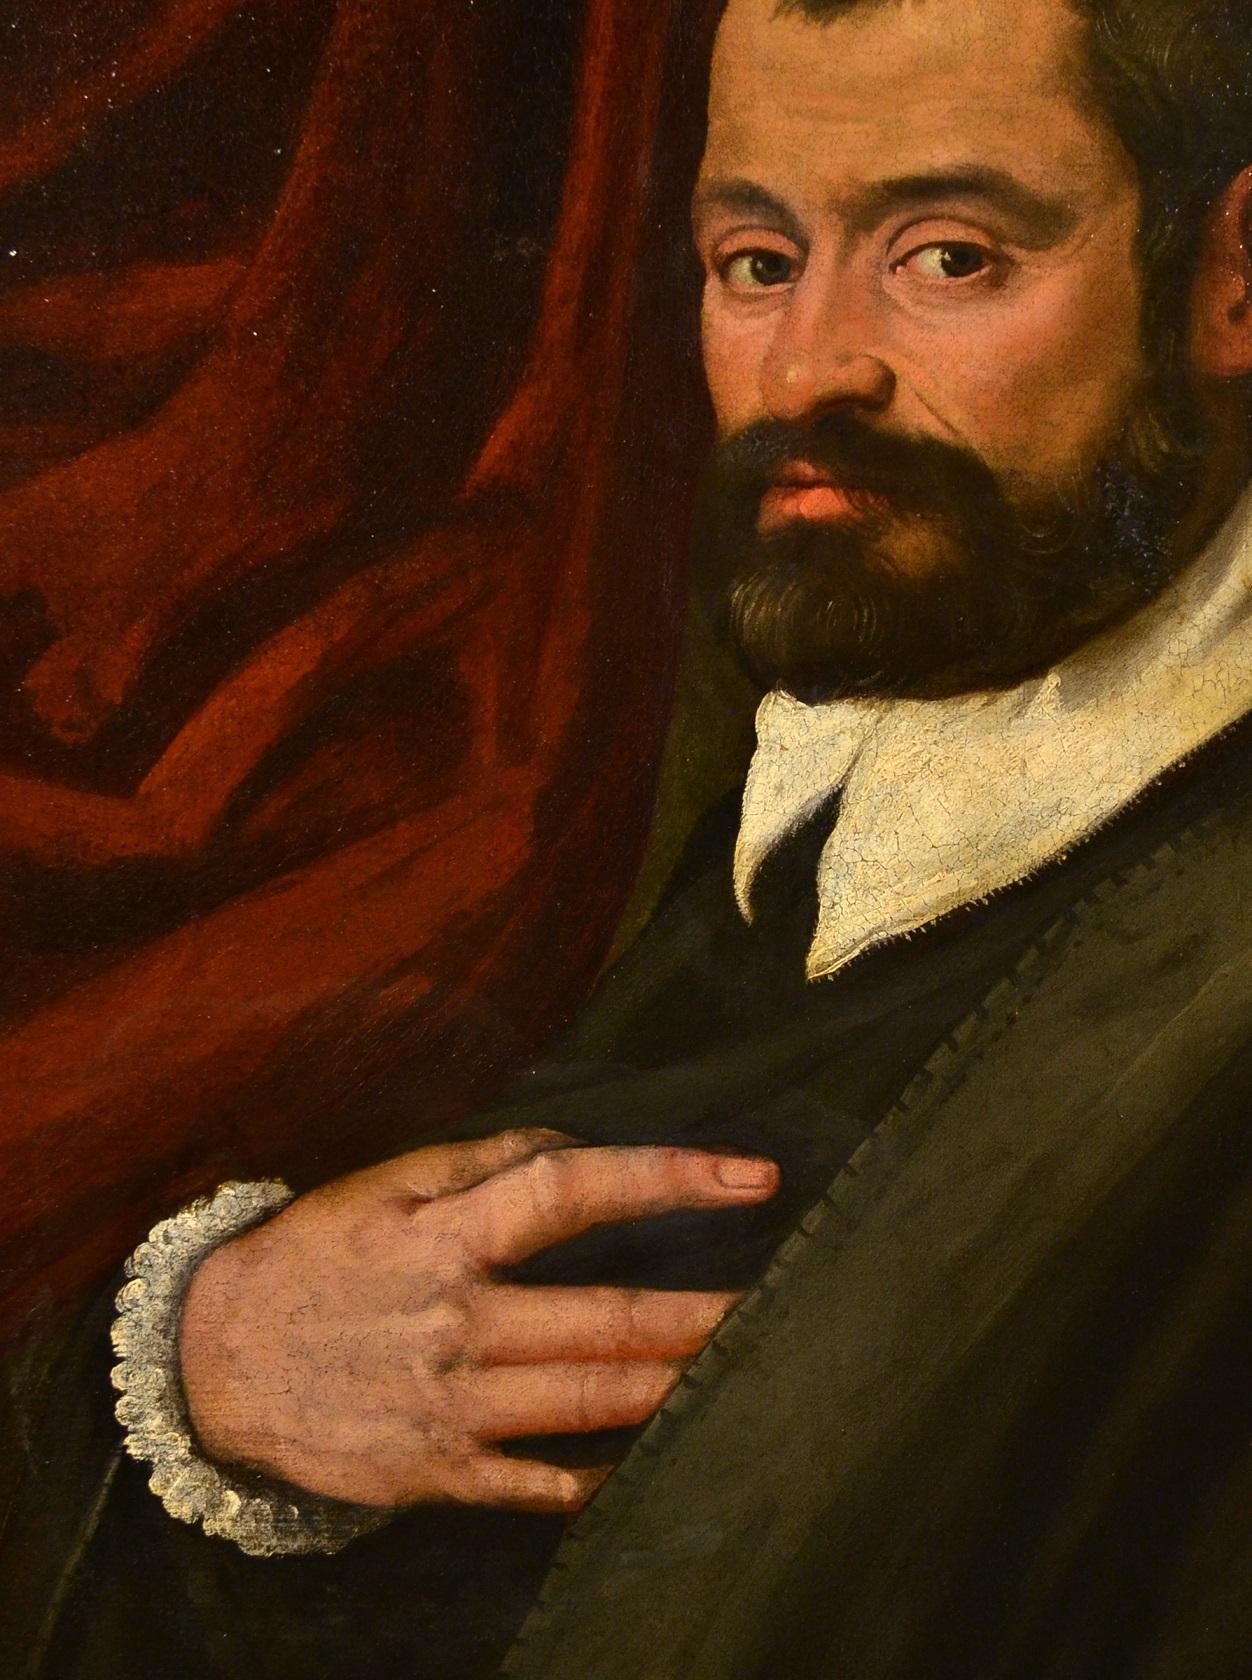 Paint Oil on canvas Portrait Venetian Tintoretto 16th Century Old master Italy  - Black Portrait Painting by Leandro da Ponte known as Leandro Bassano (Bassano, 1557 - Venice, 1622), attributed to